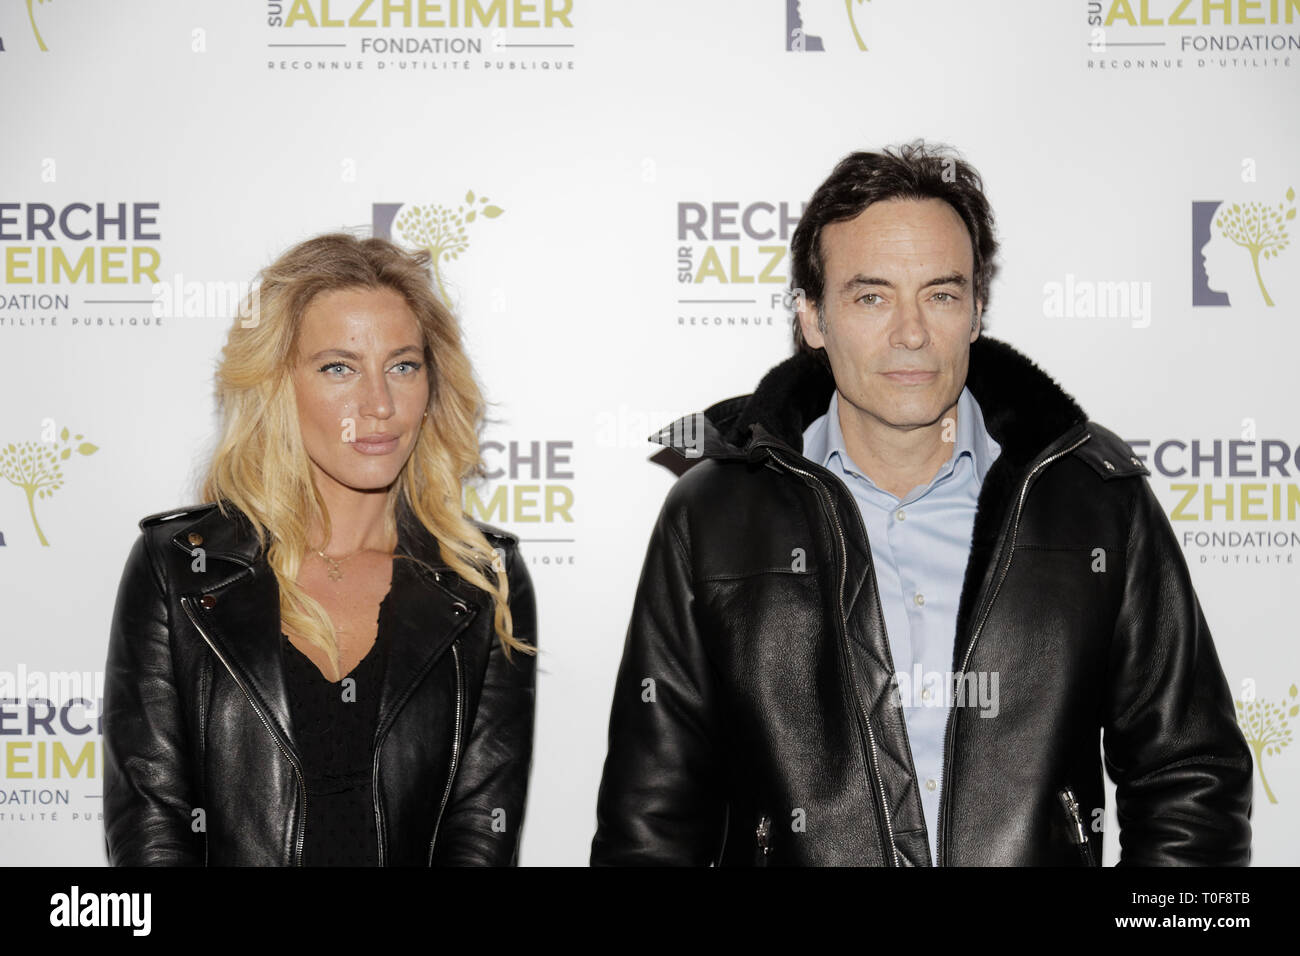 Paris, France. 18th Mar 2019. Anthony Delon and his daughter Paris, France. 18th Mar 2019. Anthony Delon - The 14th Gala 2019 of the Association for Alzheimer Research at the Olympia in Paris on March 18, 2019, France Credit: Véronique PHITOUSSI/Alamy Live News Stock Photo